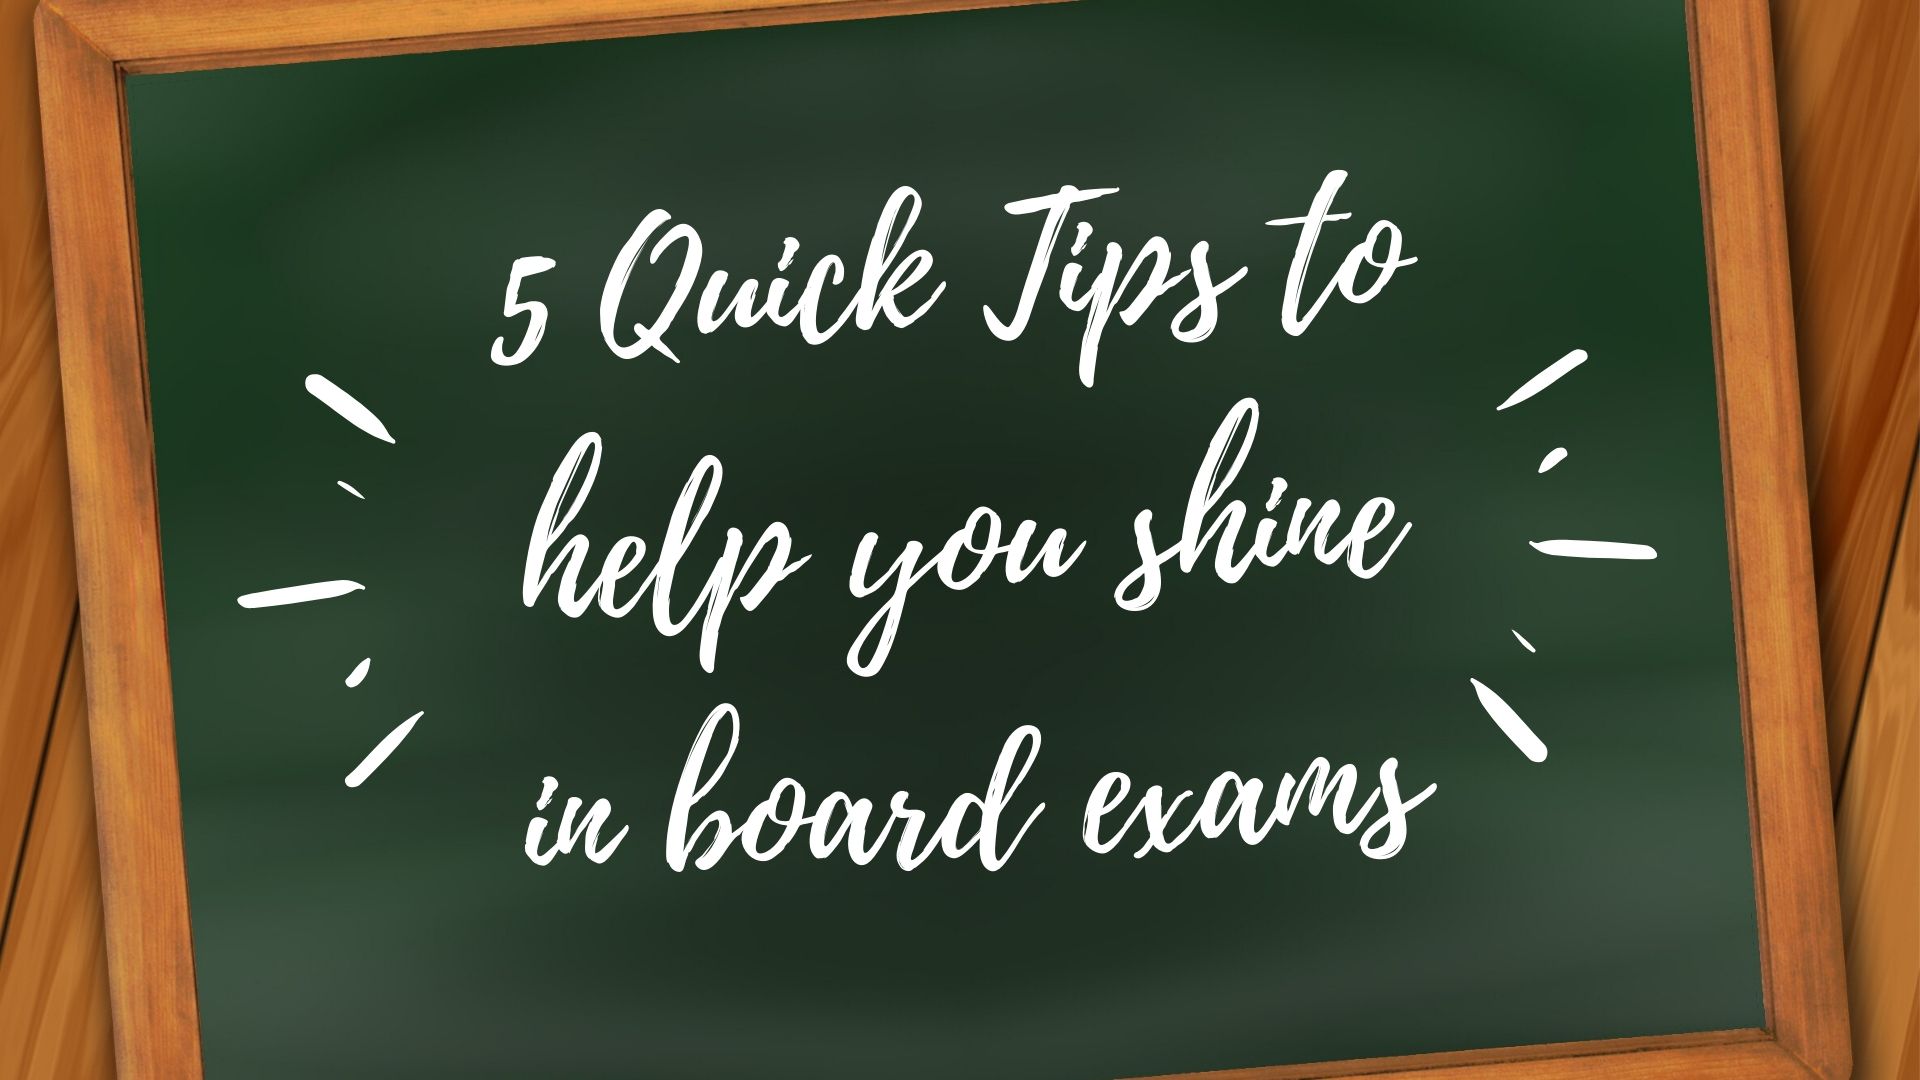 5 quick tips to help you shine in board exams